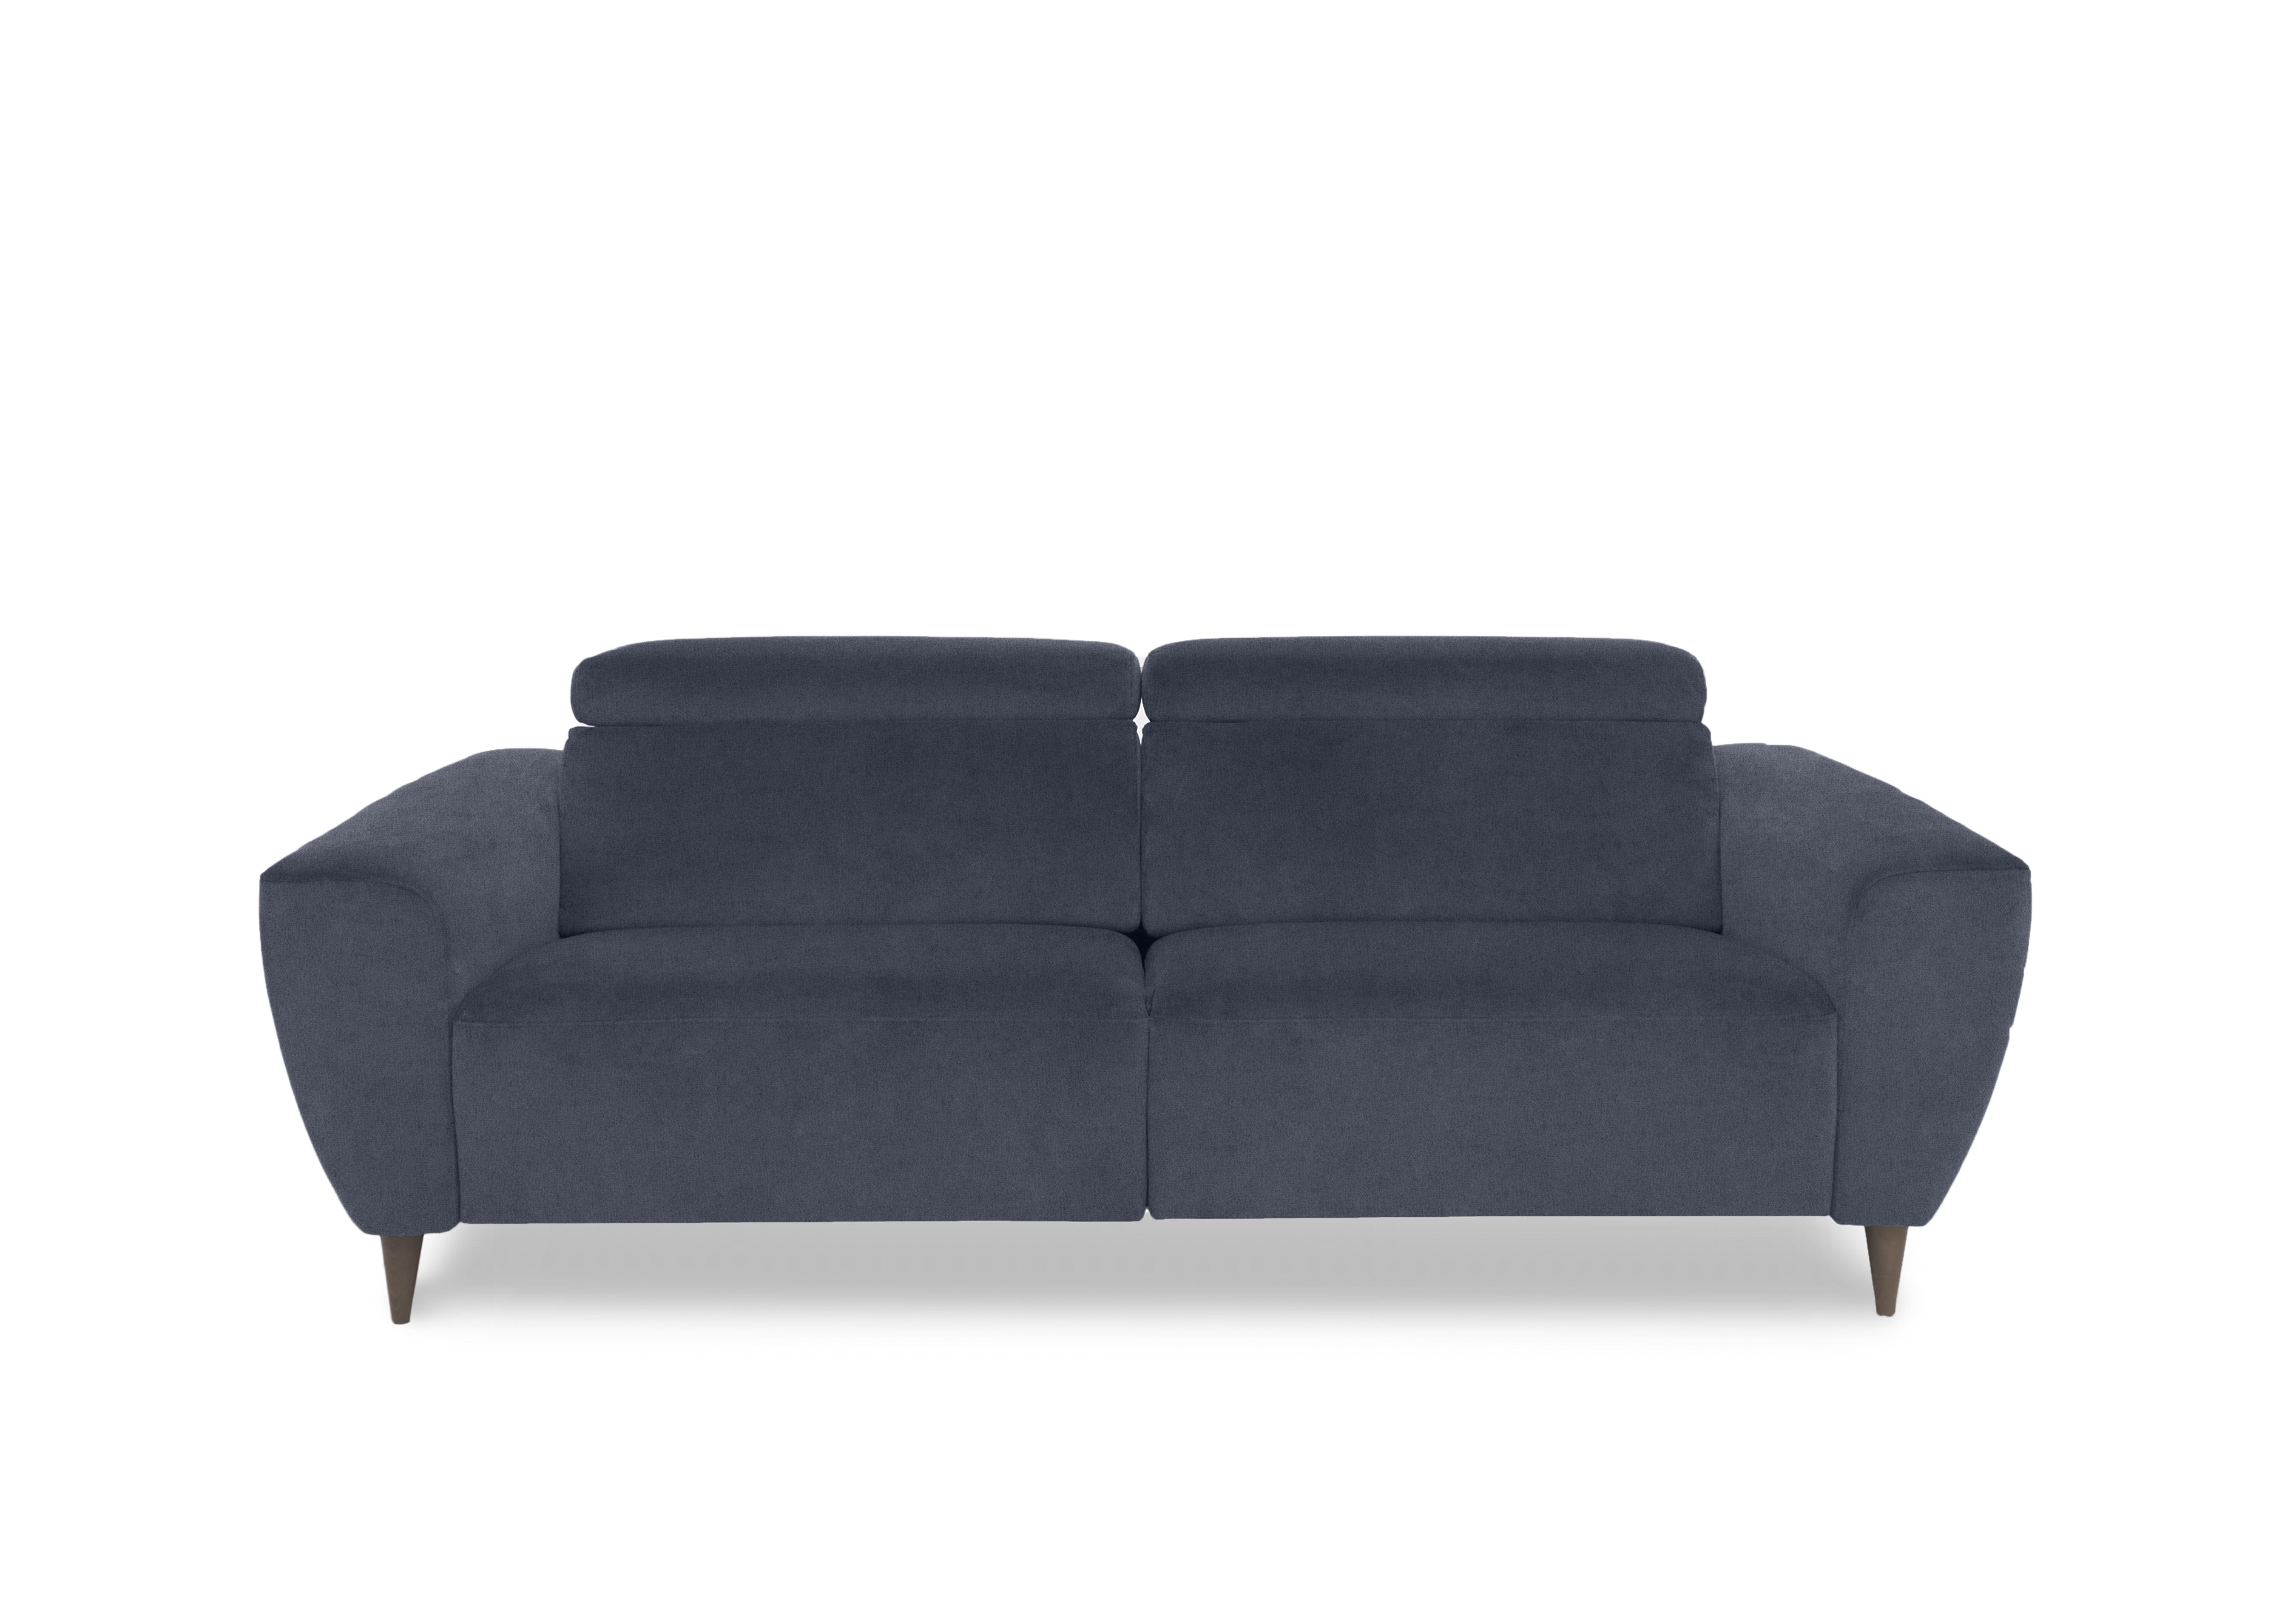 Milano 3 Seater Fabric Sofa in Fuente Ocean To Ft on Furniture Village